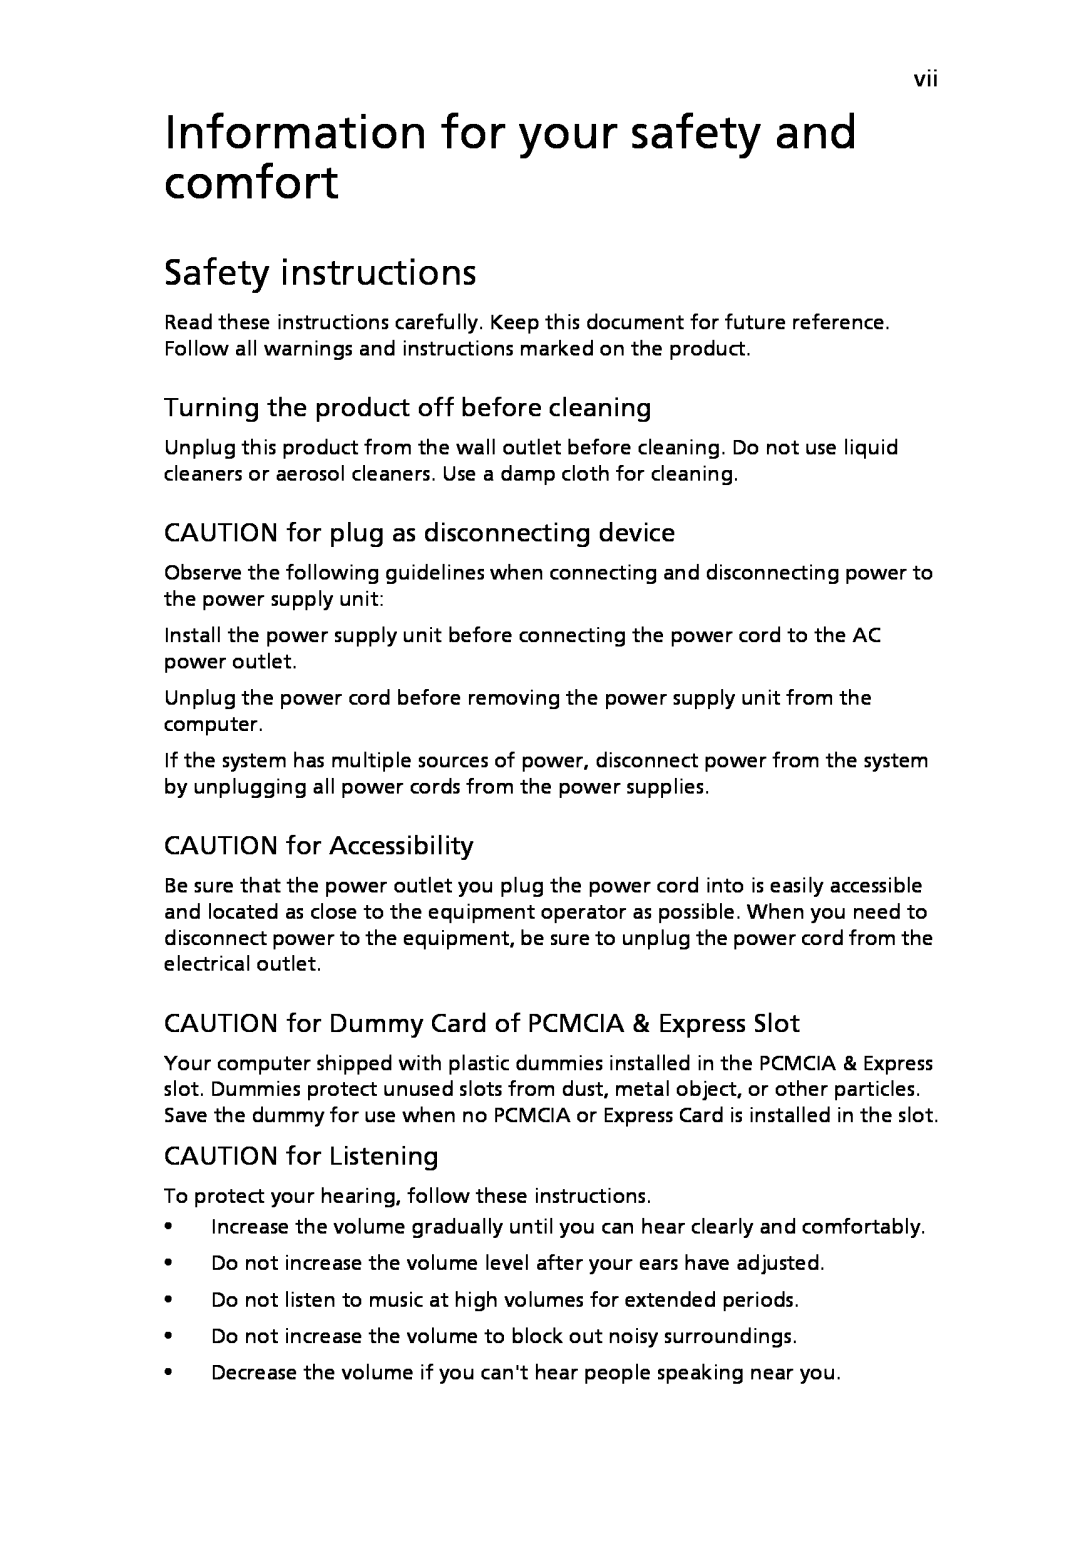 Acer 5010 Series Information for your safety and comfort, Safety instructions, Turning the product off before cleaning 